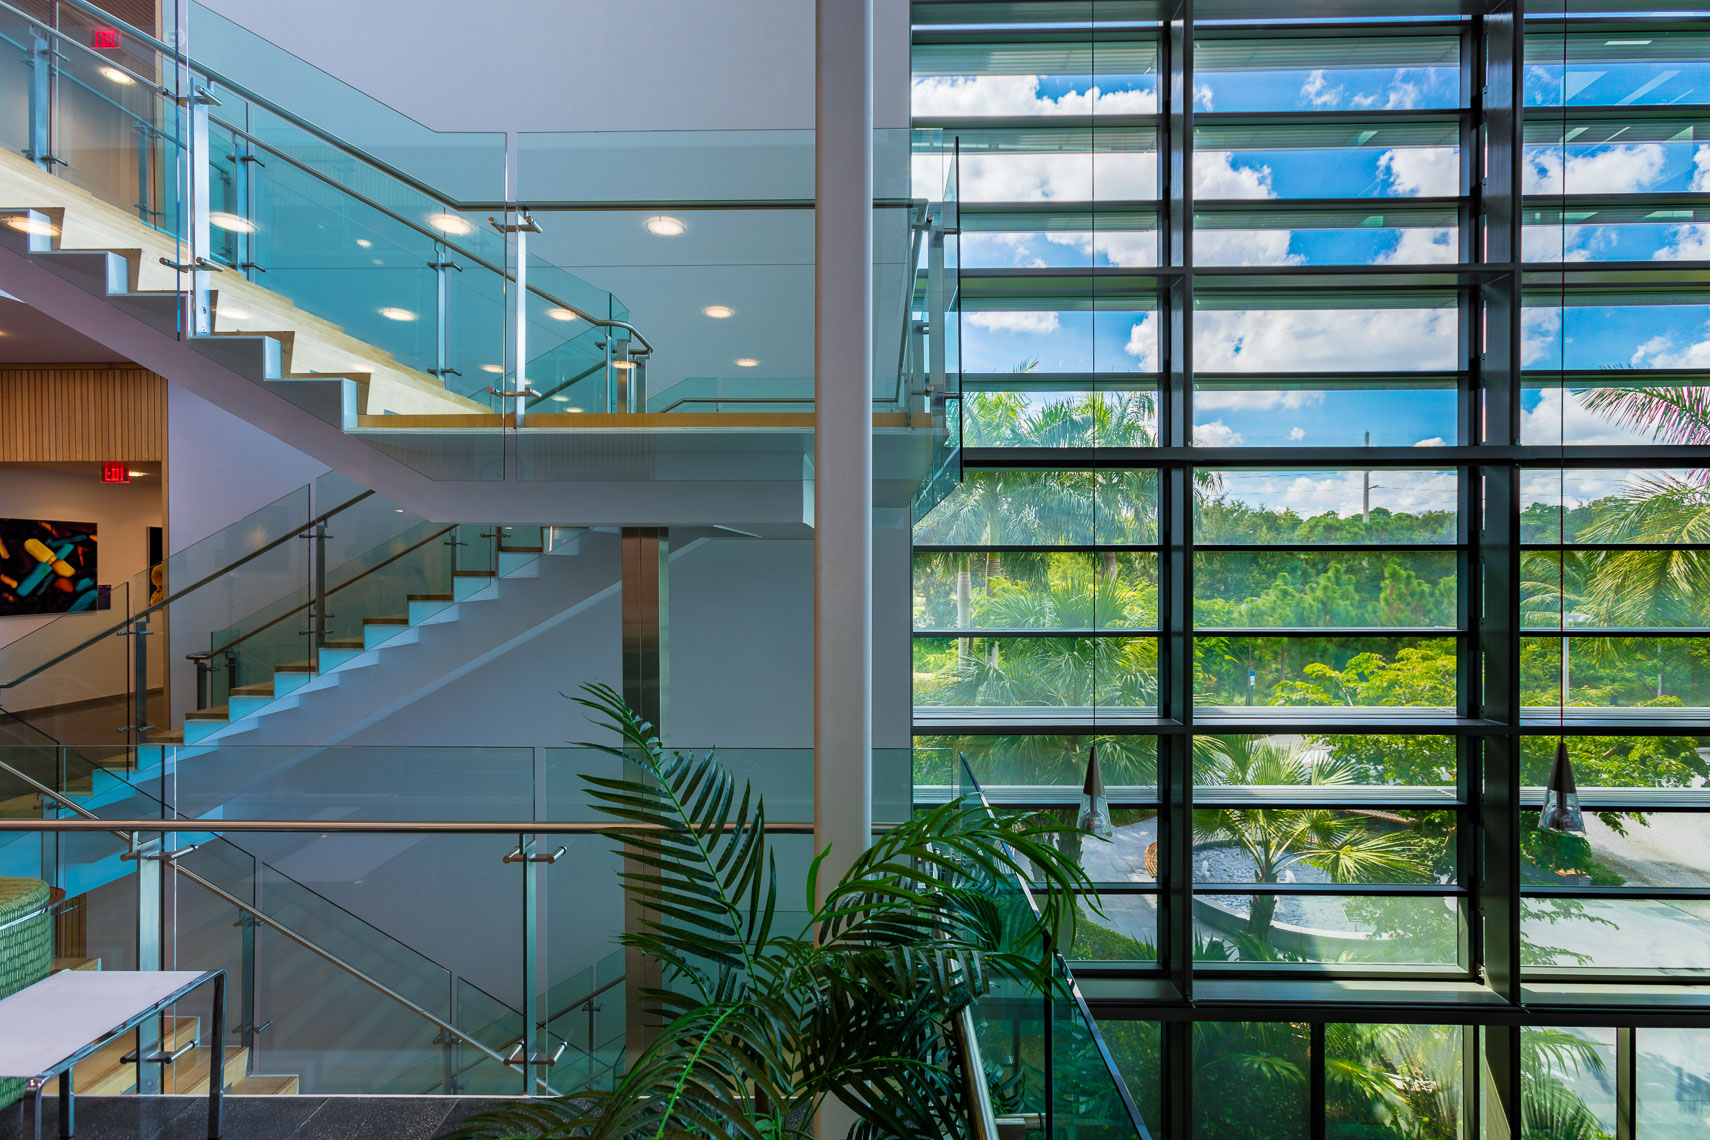 Architectural Interior at Max Planck in South Florida